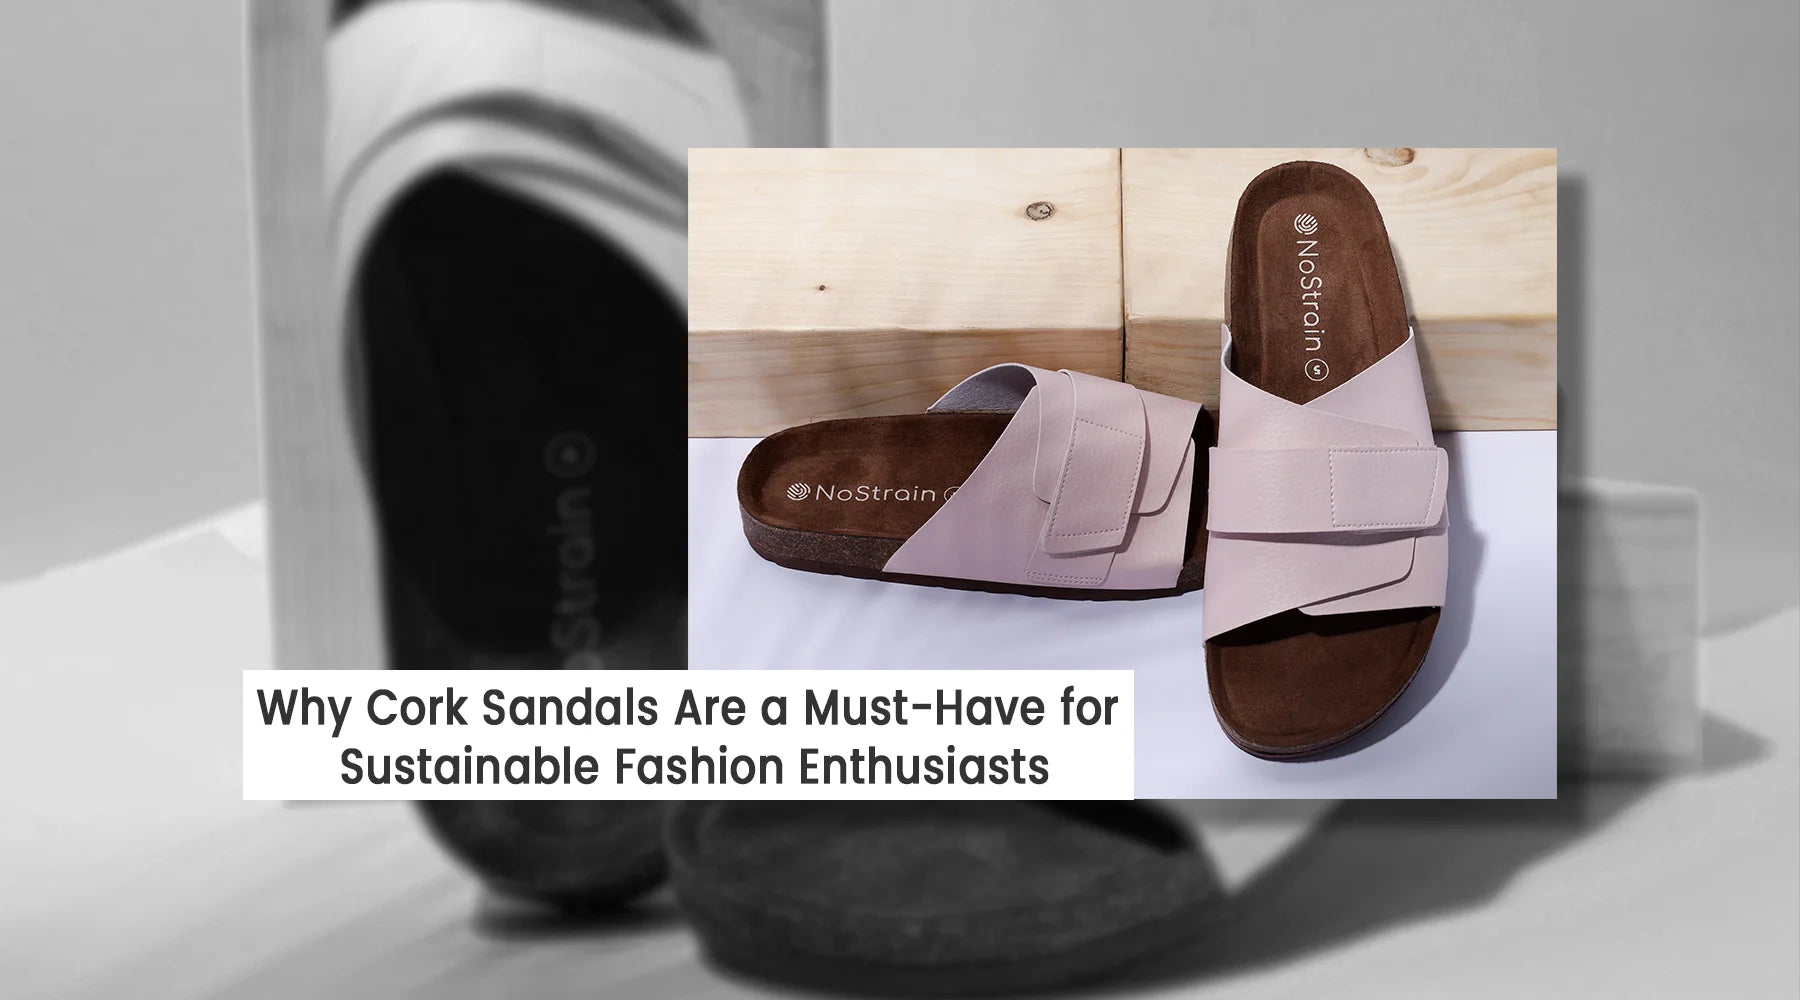 Why Cork Sandals Are a Must-Have for Sustainable Fashion Enthusiasts